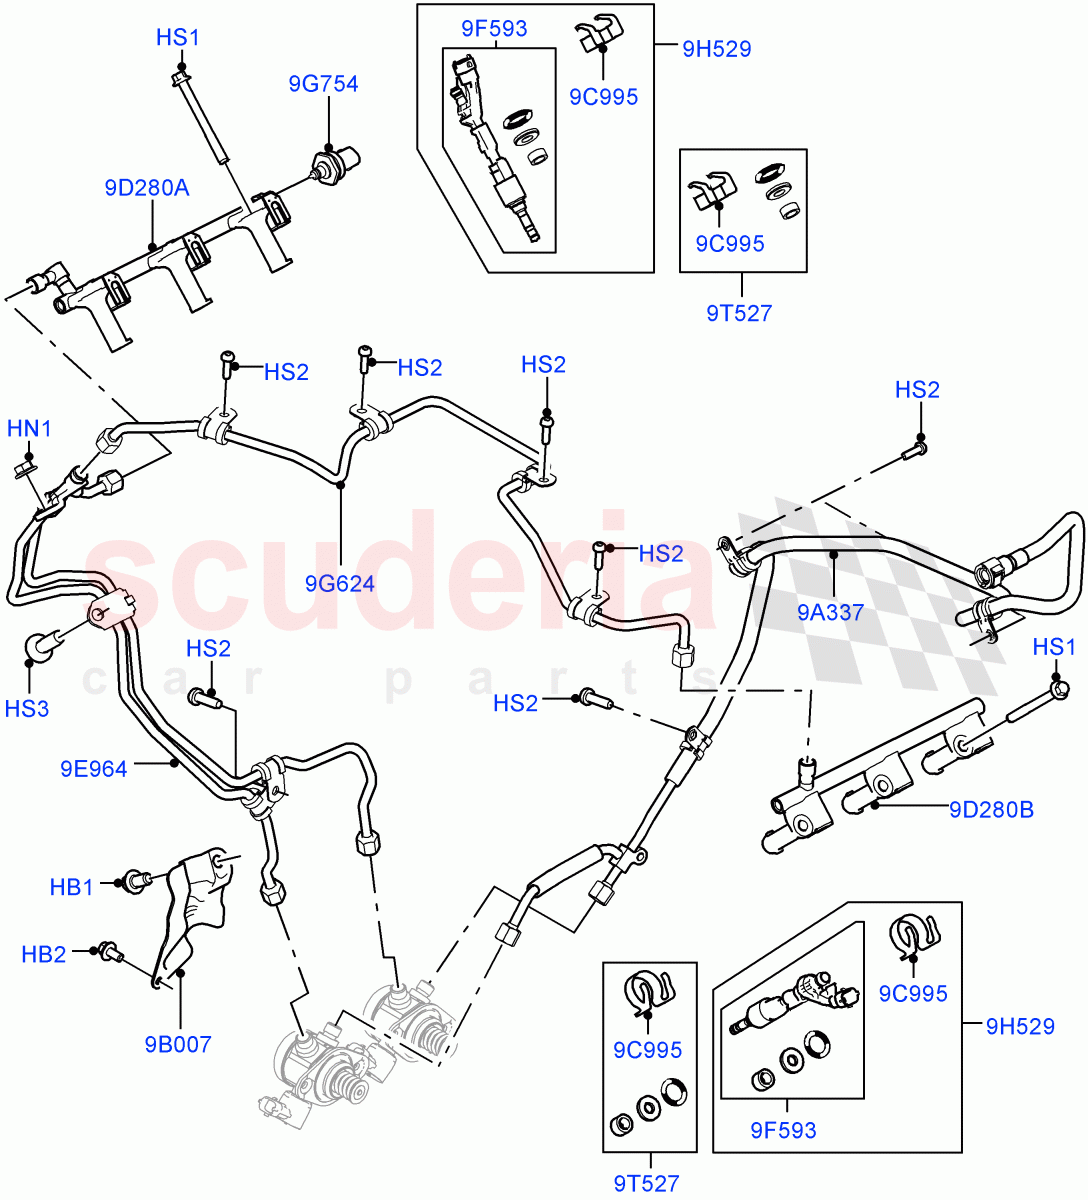 Fuel Injectors And Pipes(Solihull Plant Build)(3.0L DOHC GDI SC V6 PETROL)((V)FROMEA000001) of Land Rover Land Rover Discovery 4 (2010-2016) [3.0 DOHC GDI SC V6 Petrol]